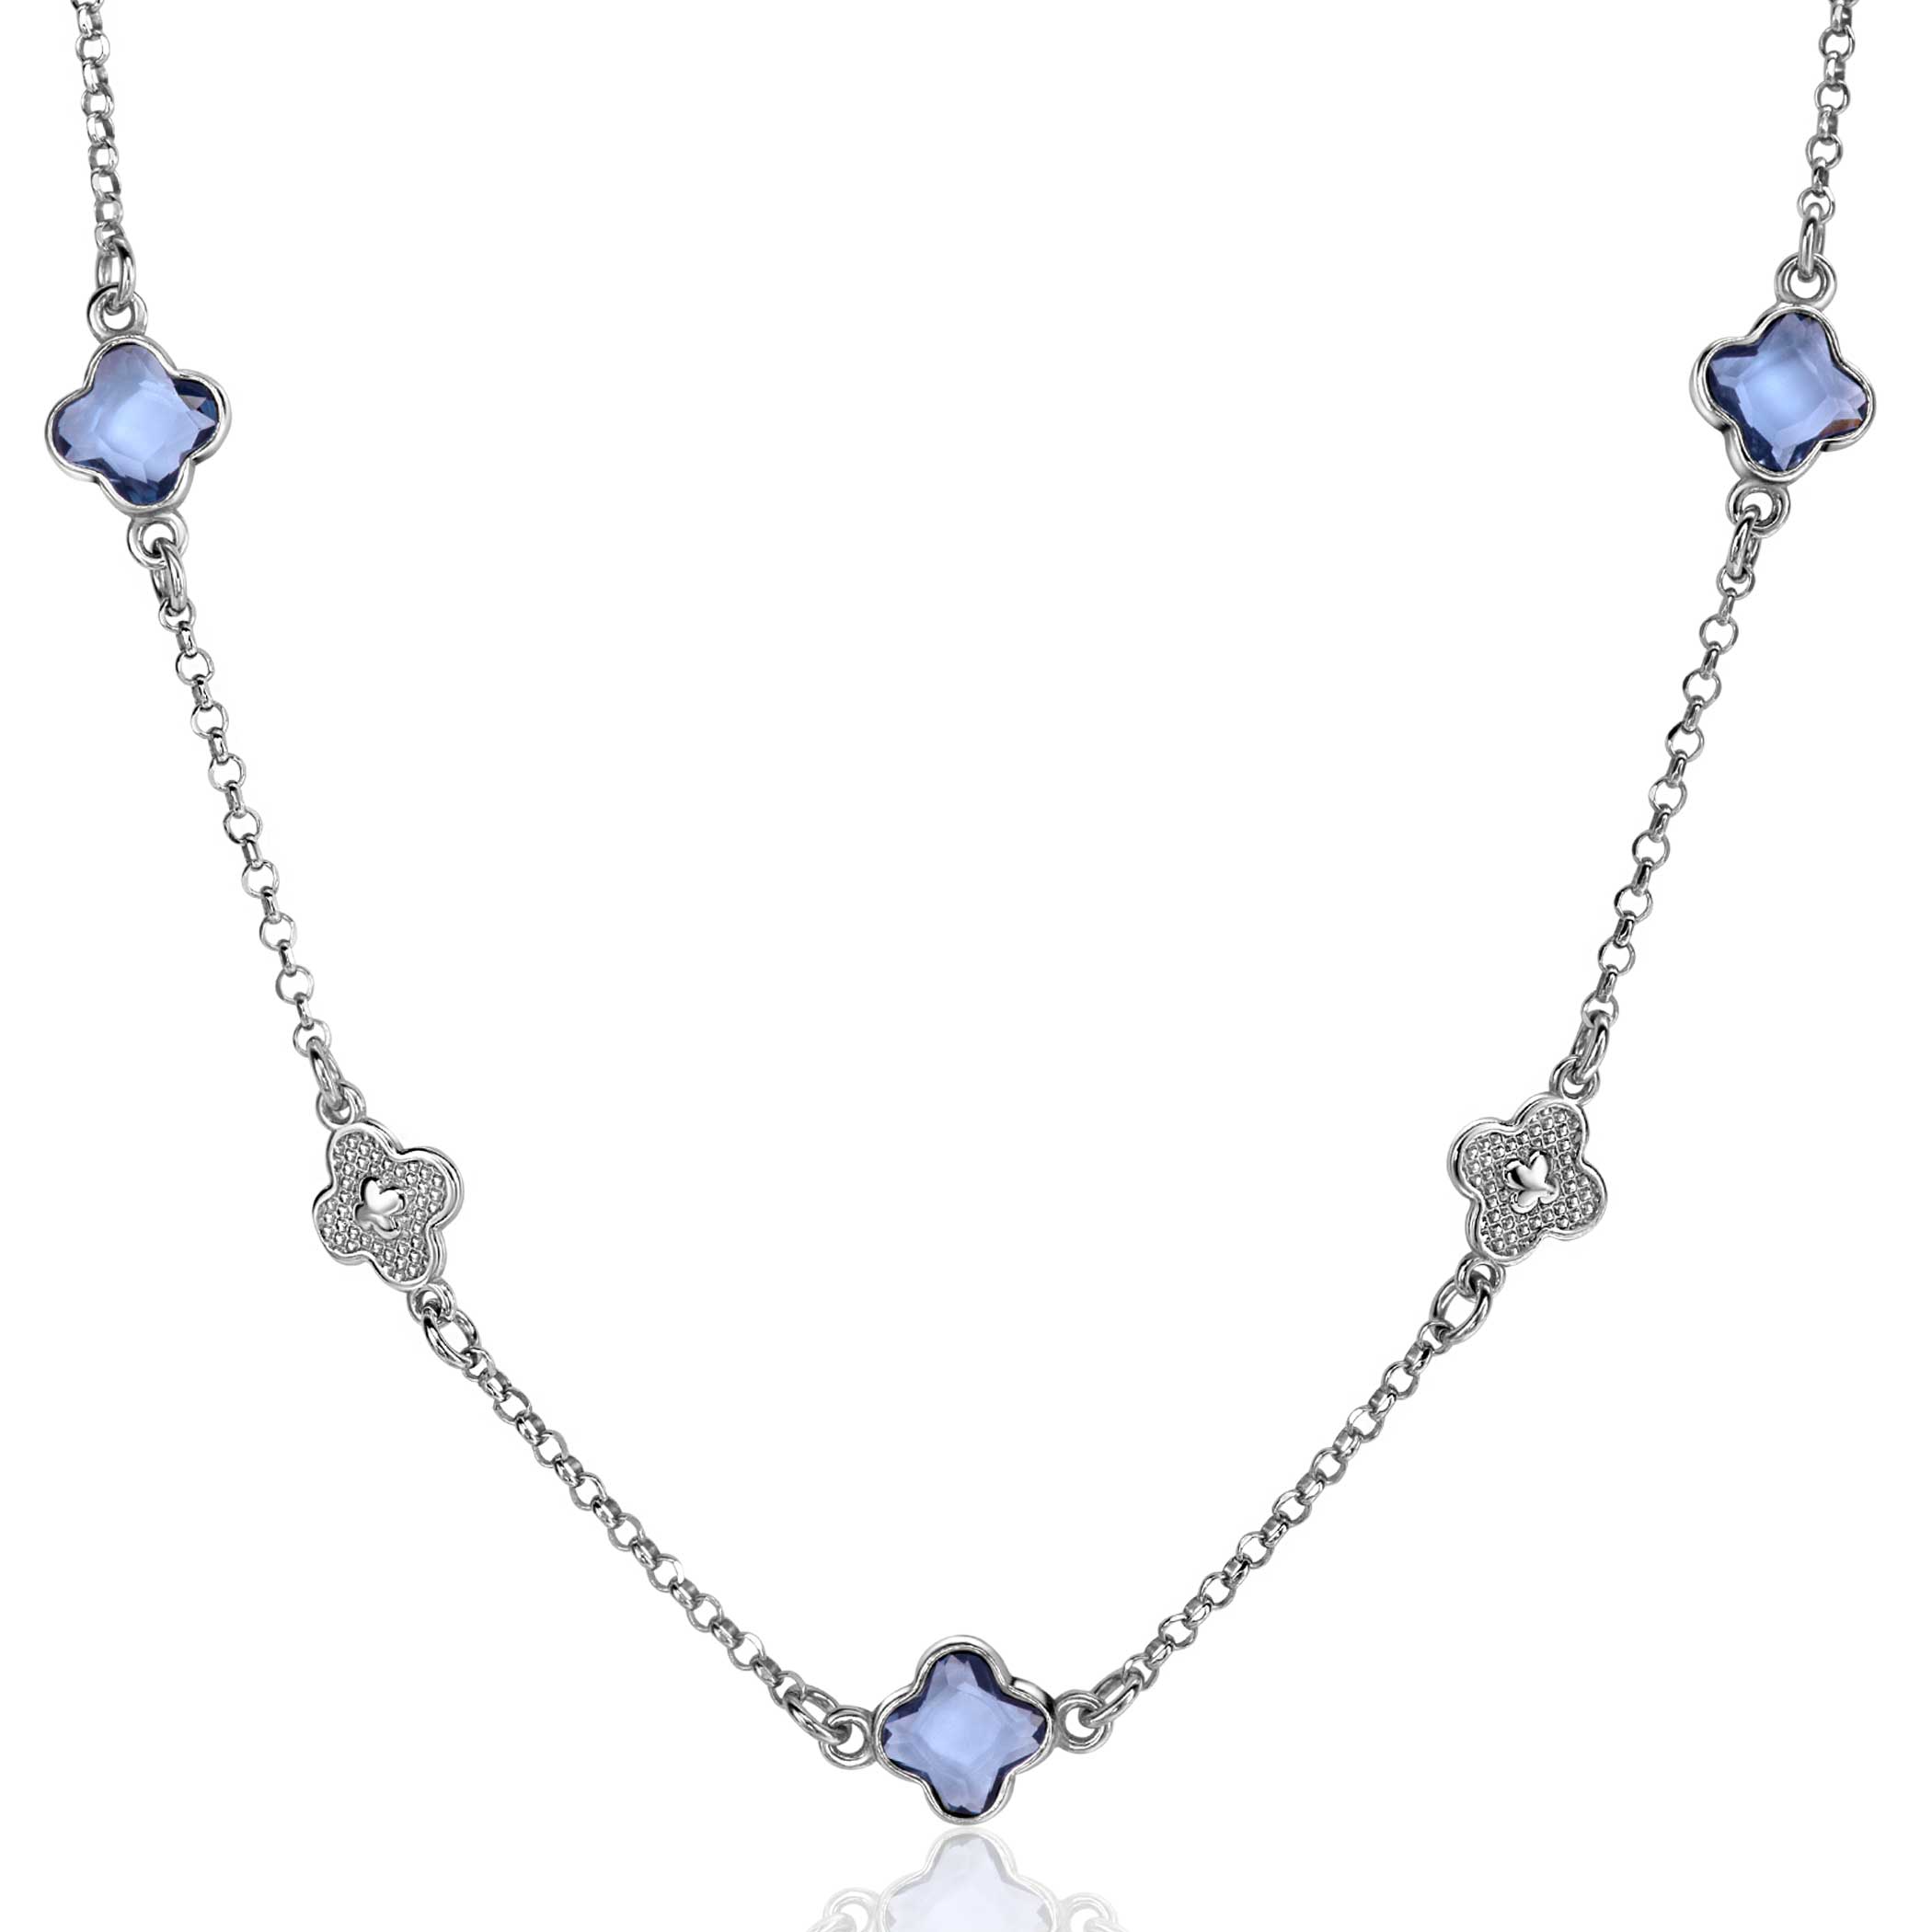 ZINZI silver link necklace with two silver and three blue clovers 40-45cm ZIC2582
